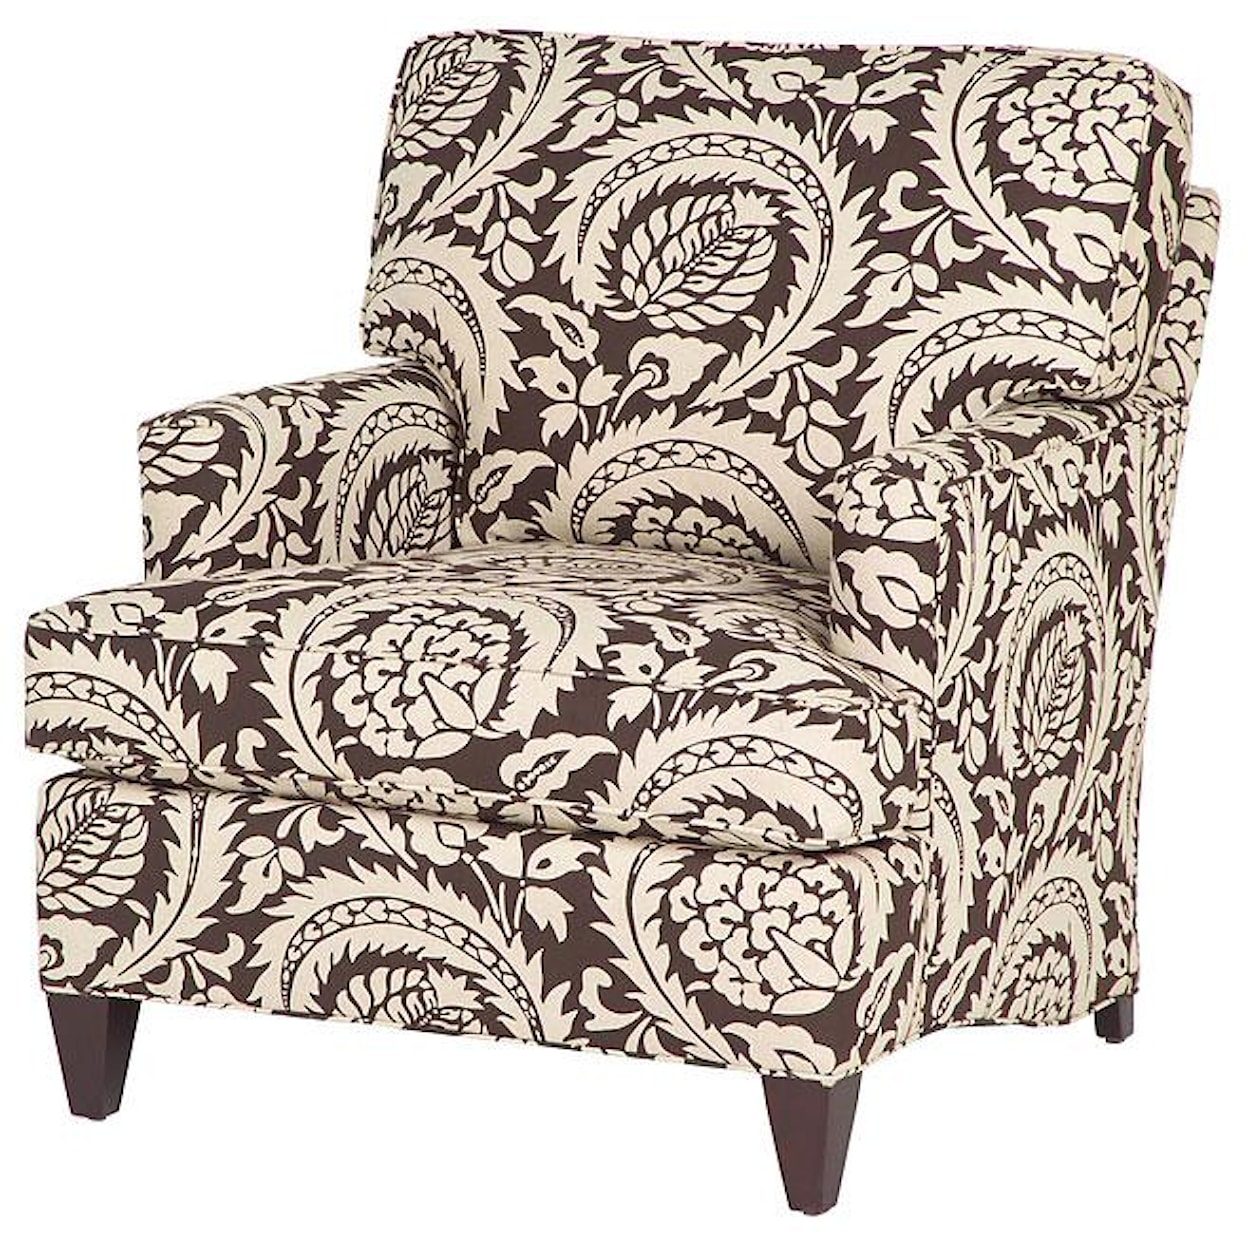 Taylor King Cozy Creations Customizable Arm Chair